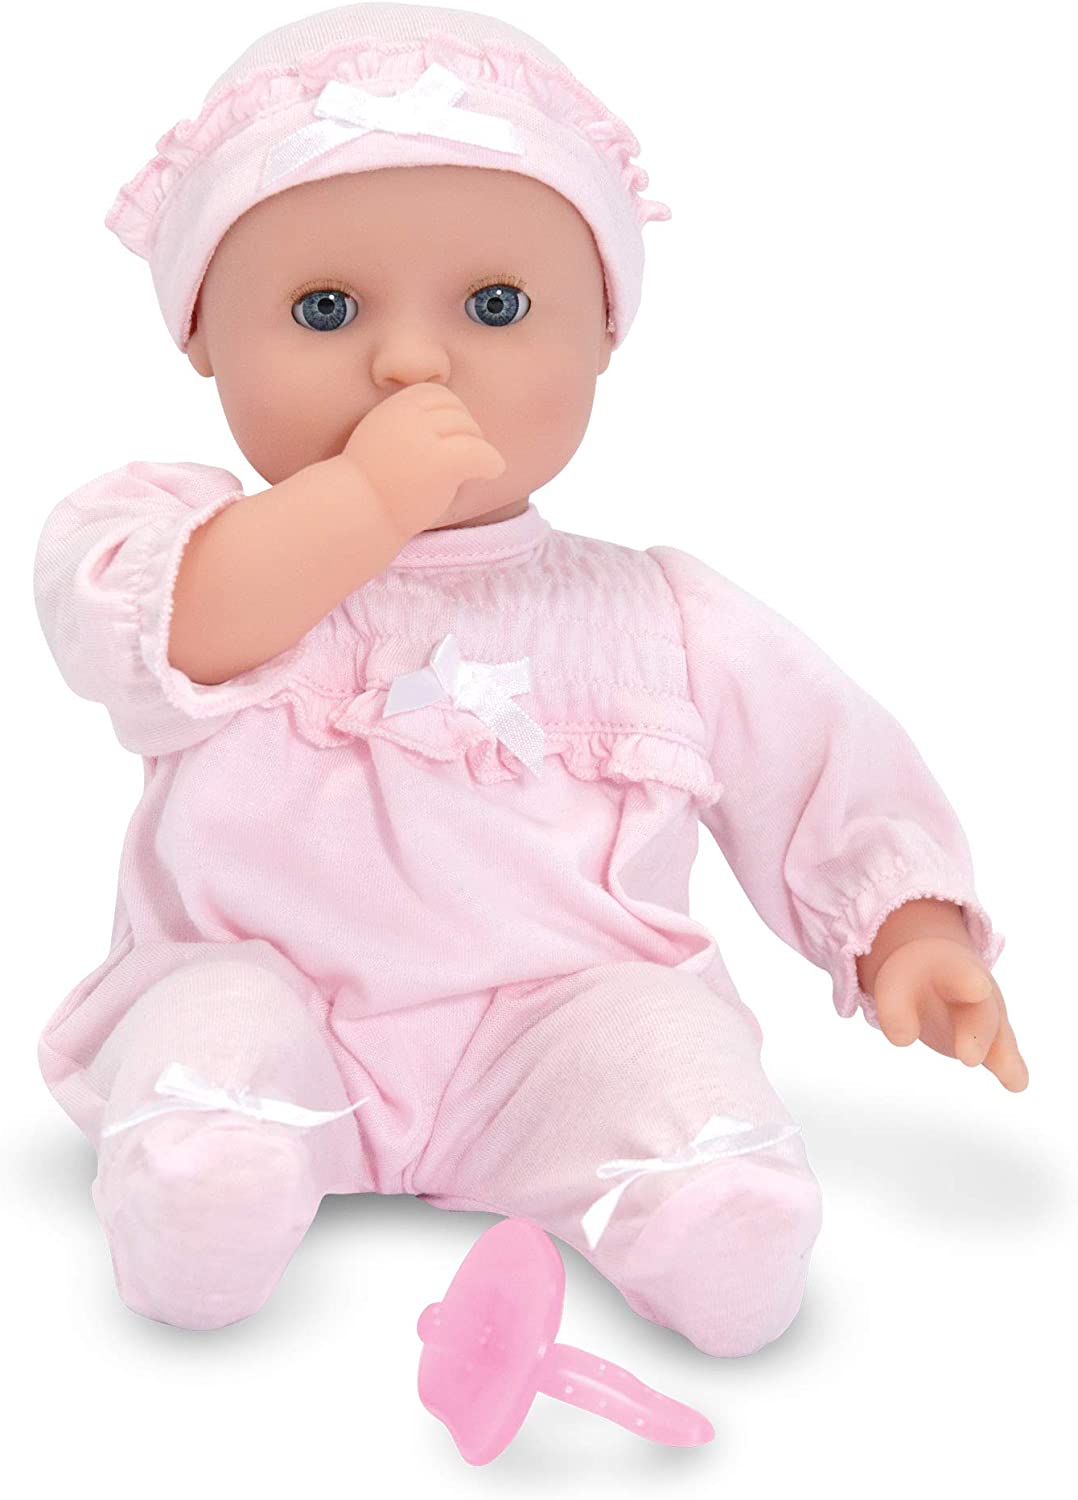 Melissa & Doug Pretend Play Jenna Baby Doll For 3-Year-Old Girls, 12-Inch